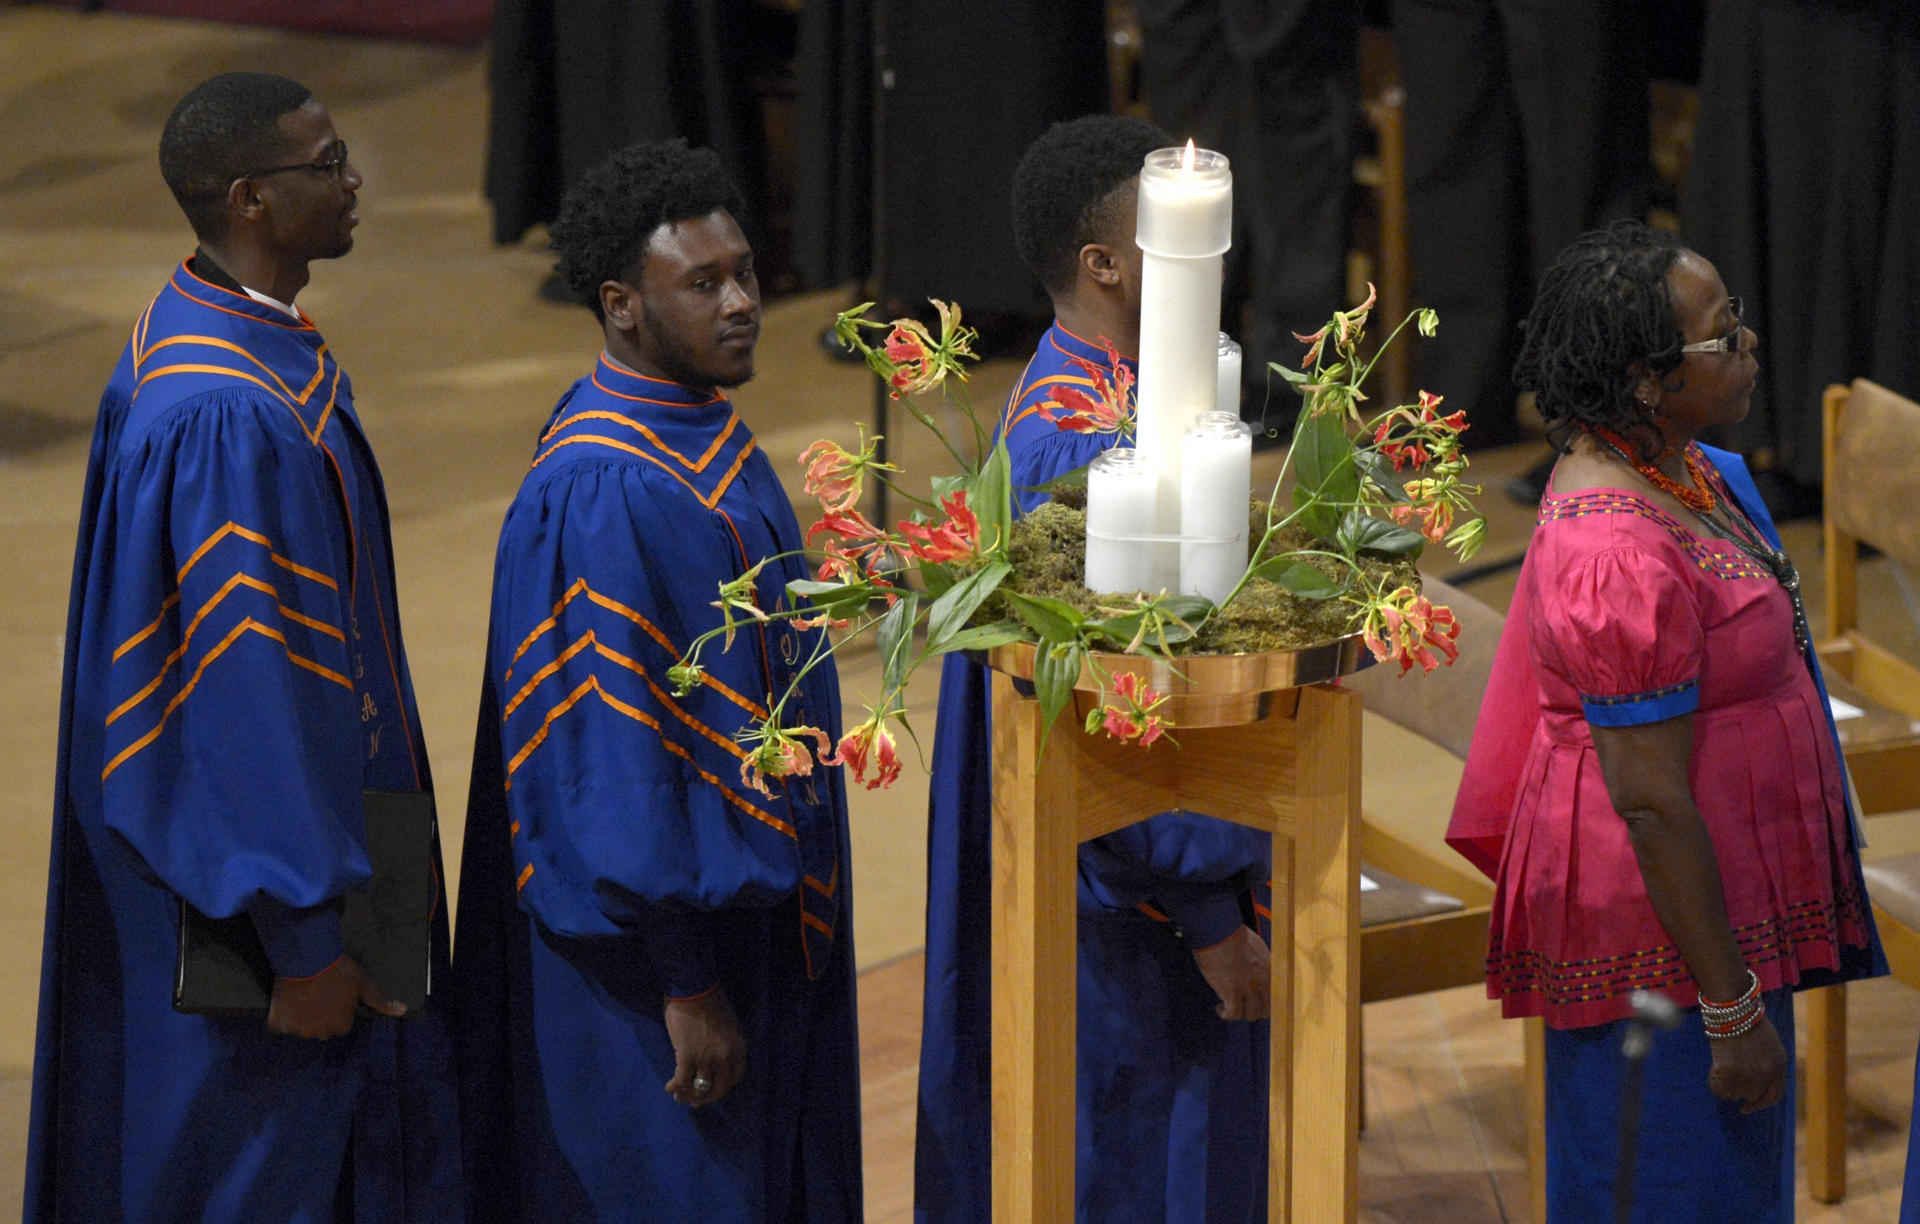 A file photo shows members of the Morgan State University Choir walk by the memorial candle during the National Memorial Service for the late South African President Nelson Mandela at the National Cathedral in Washington, DC, USA, 11 December 2013. EPA/FILE/SHAWN THEW